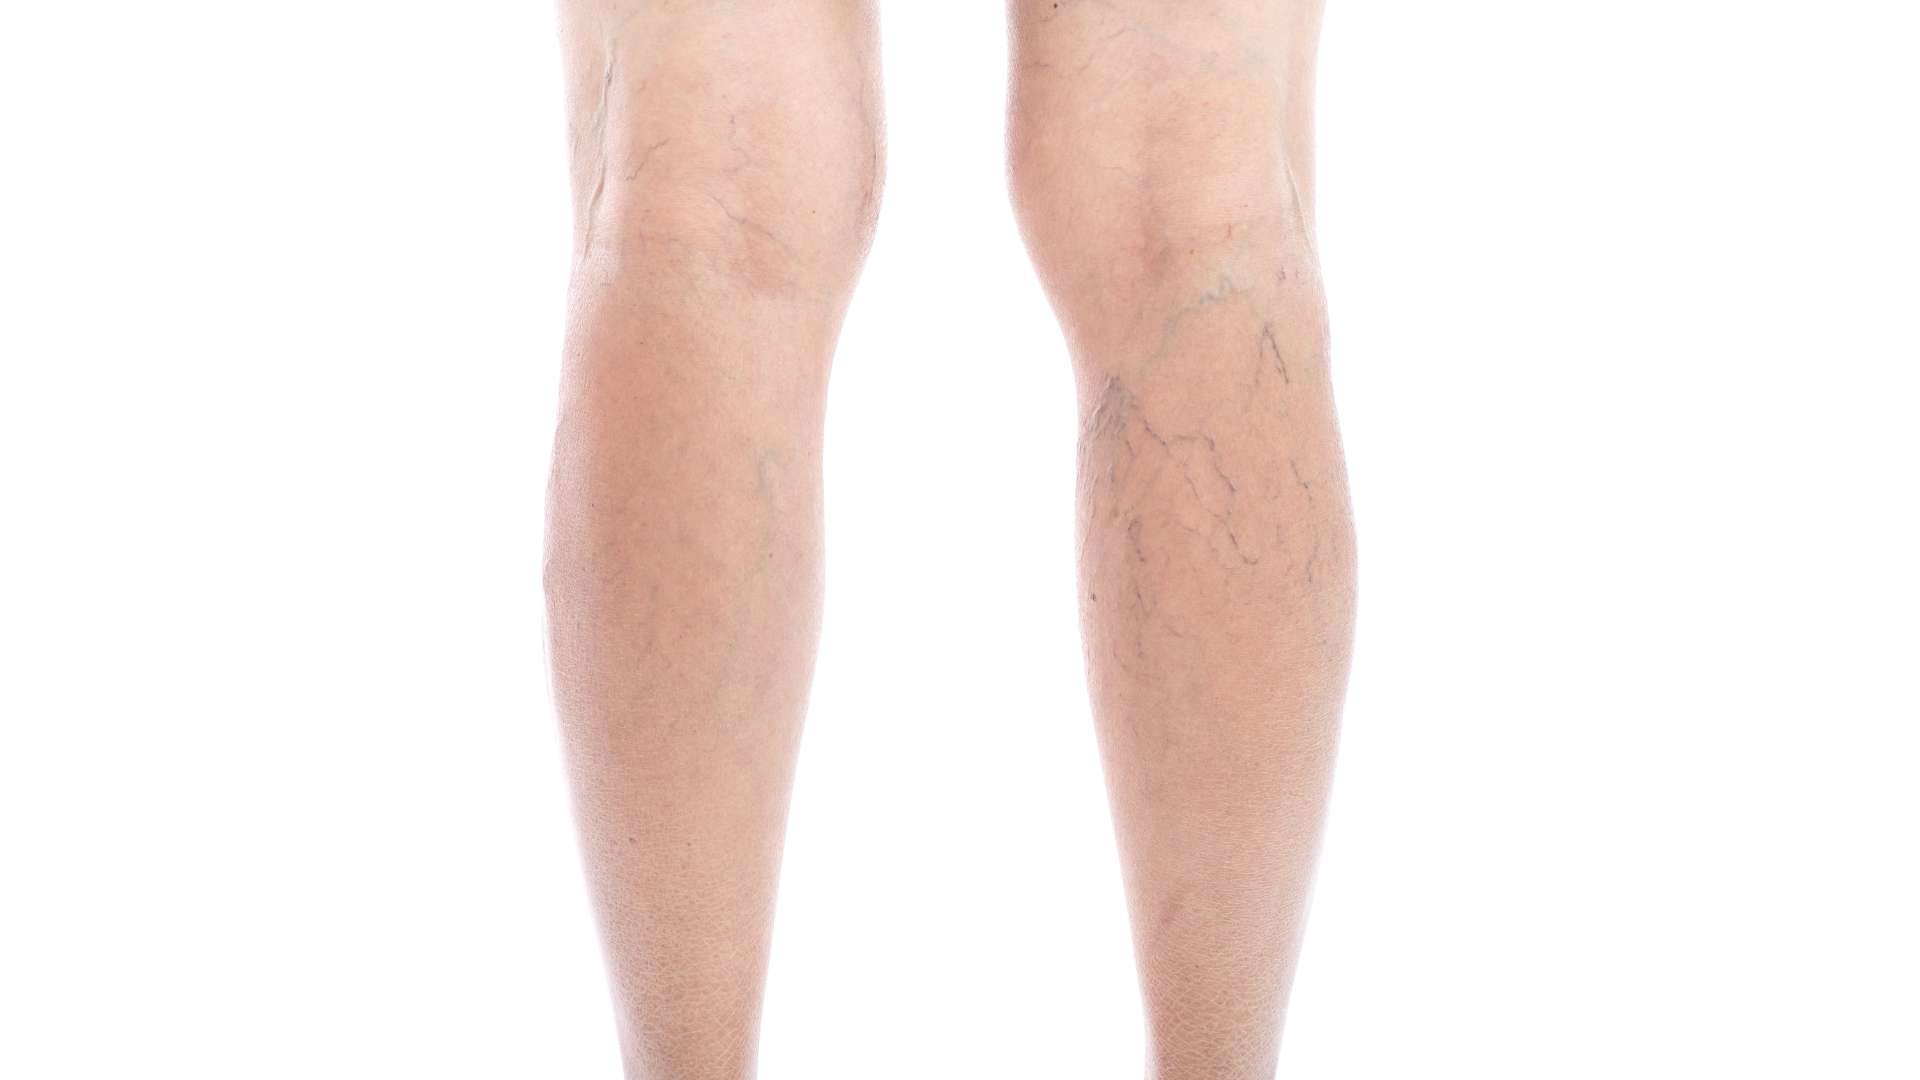 A Los Angeles person showing their legs with varicose veins or spider veins